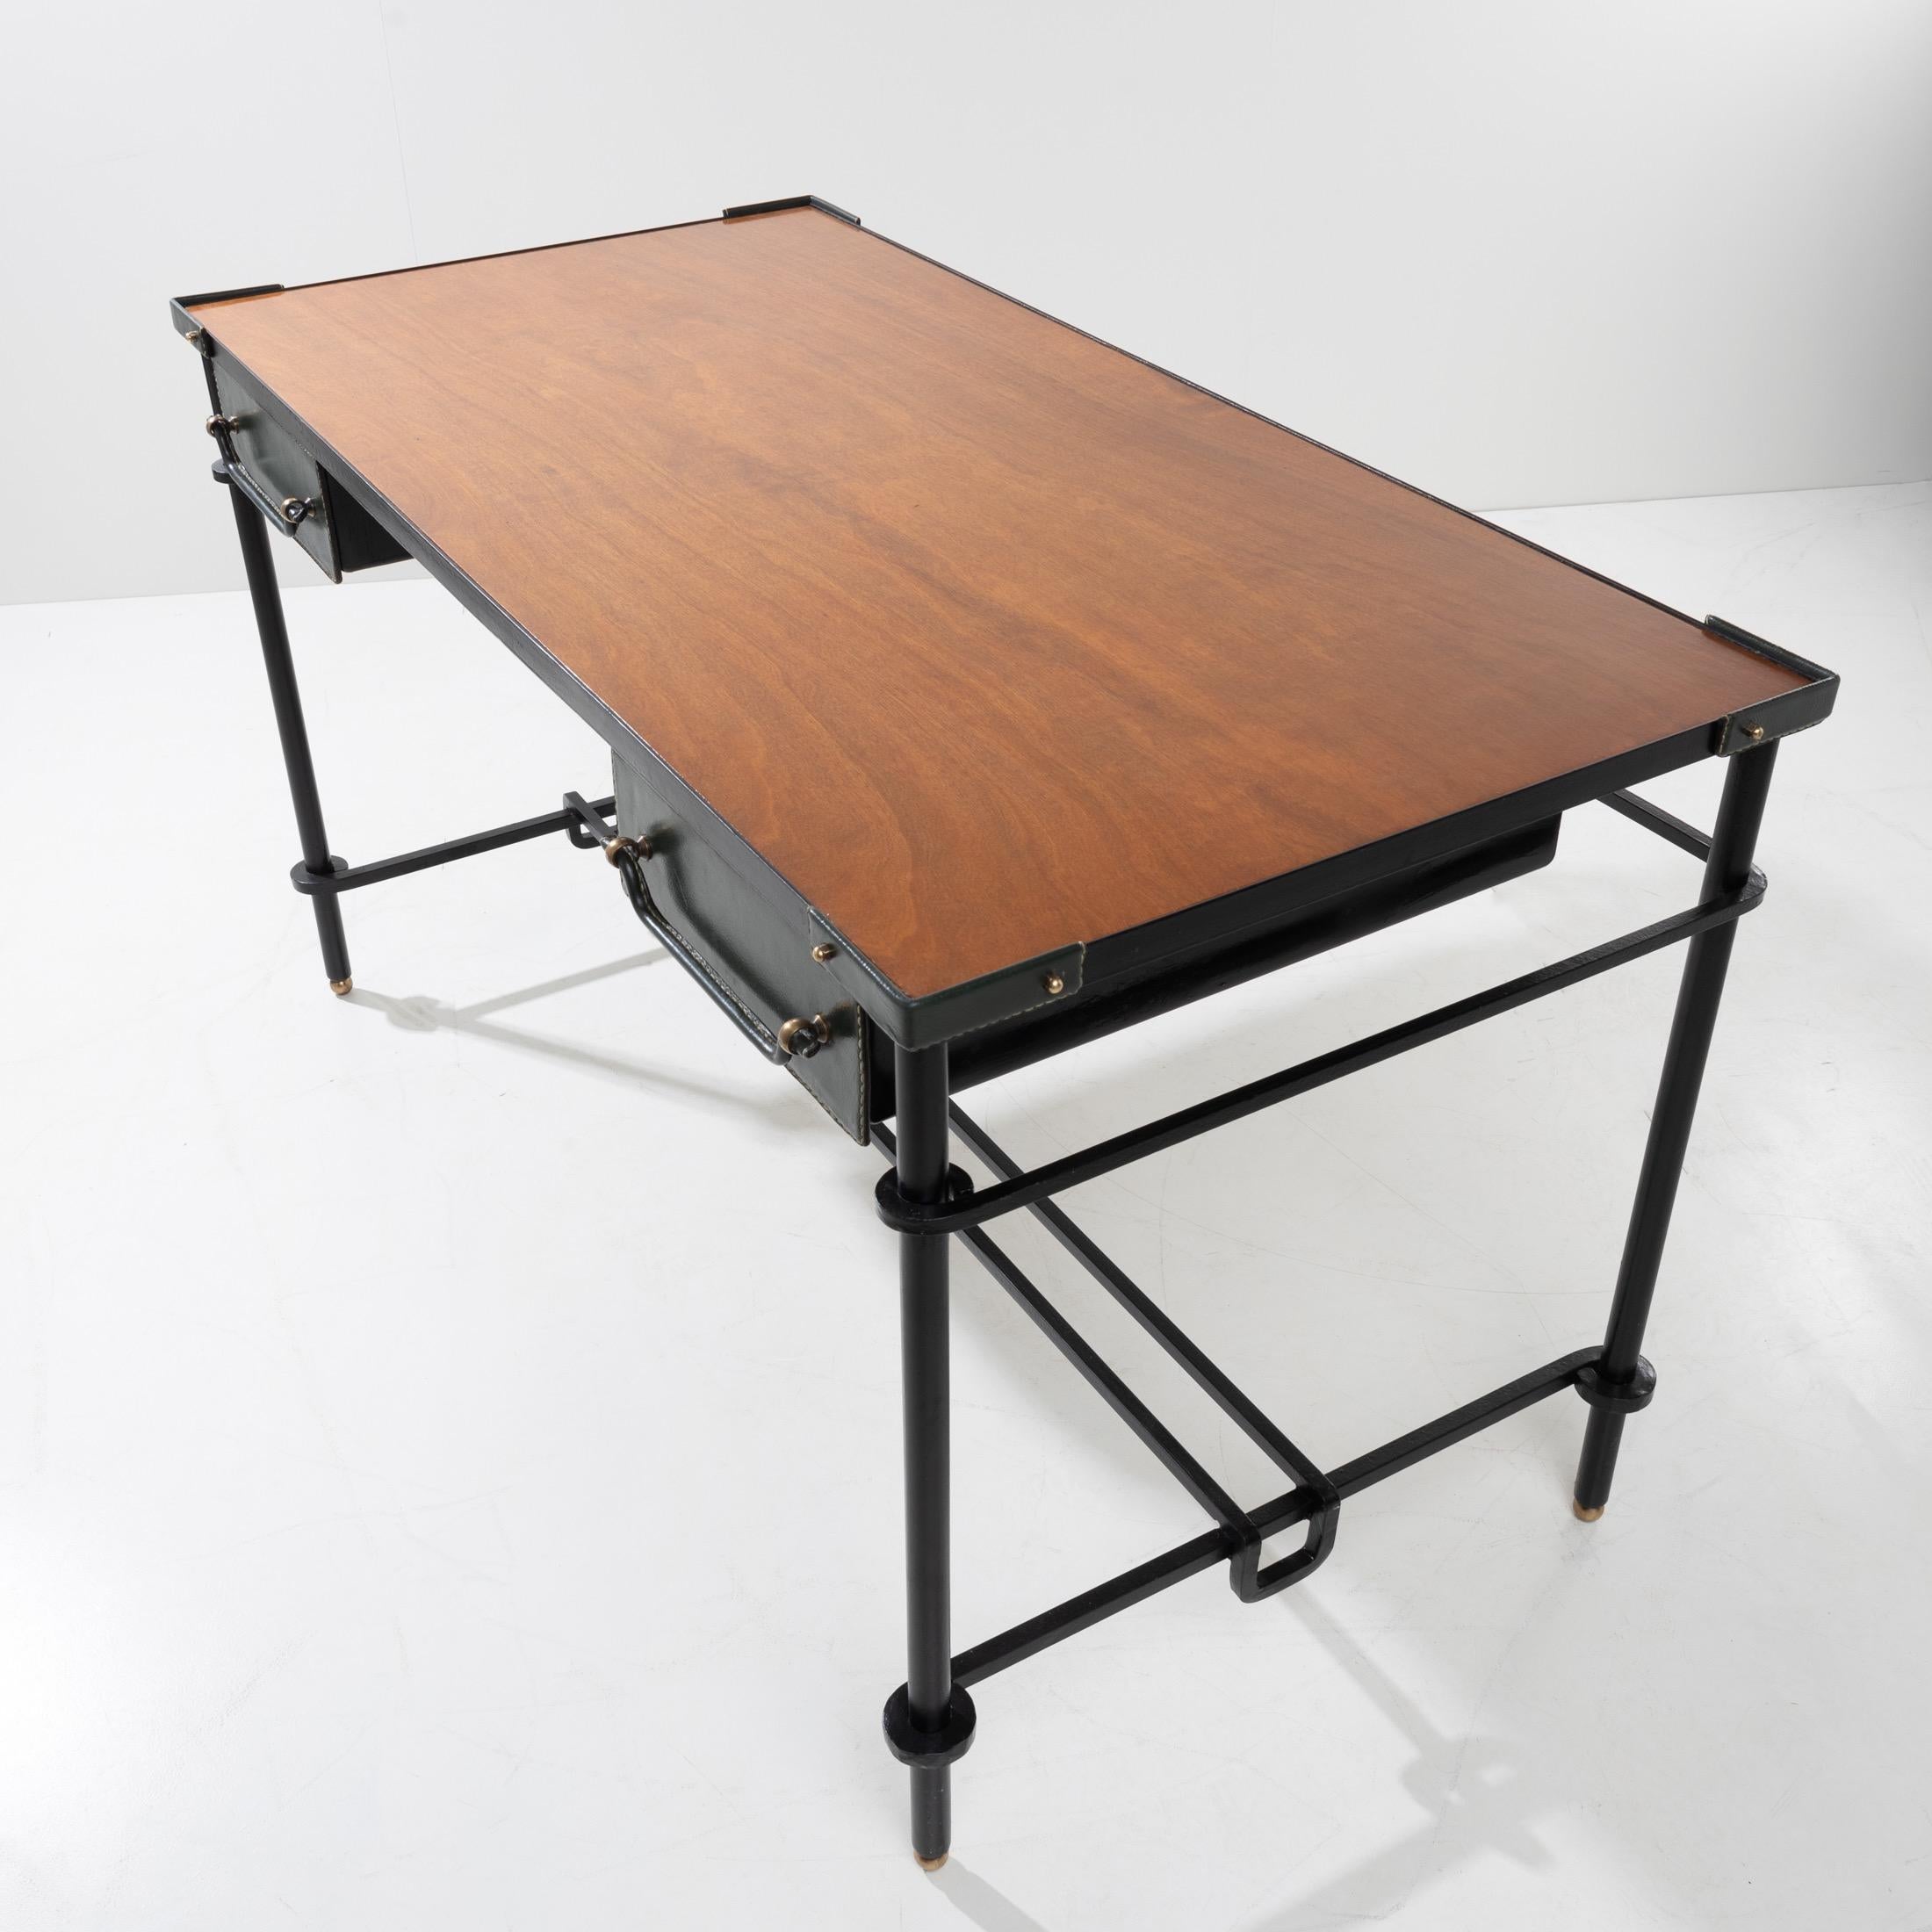 Very nice desk in black patinated wrought iron.
The 4 feet supporting the belt of the upper plate also in steel.
They are joined by a spacer in the lower part 